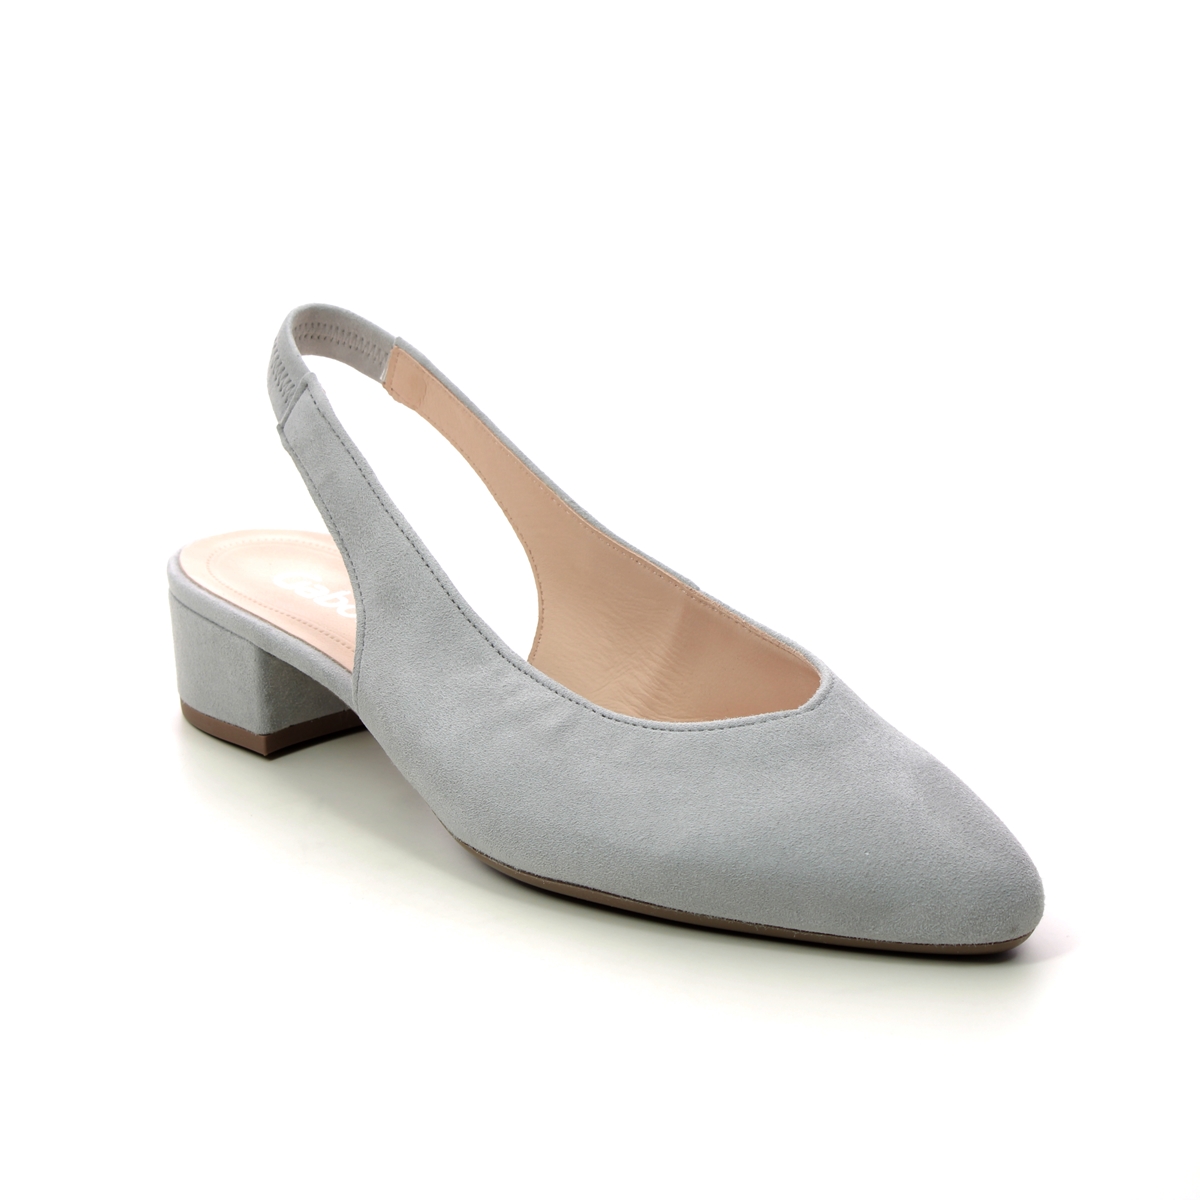 Gabor Mack Light Grey Suede Womens Slingback Shoes 21.520.19 in a Plain Leather in Size 4